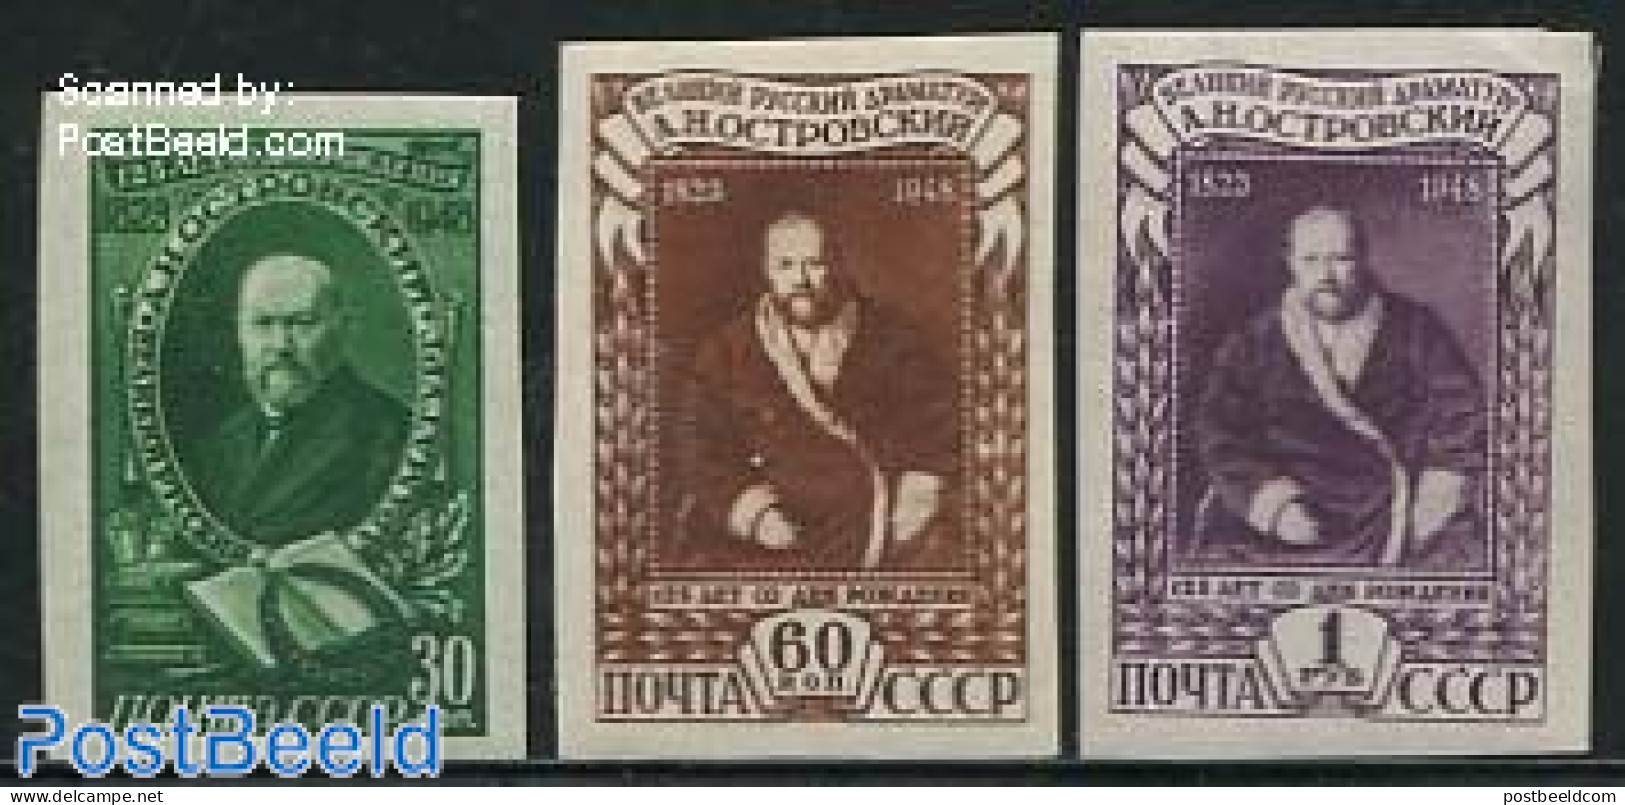 Russia, Soviet Union 1948 A. Ostrowskij 3v Imperforated, Unused (hinged) - Neufs